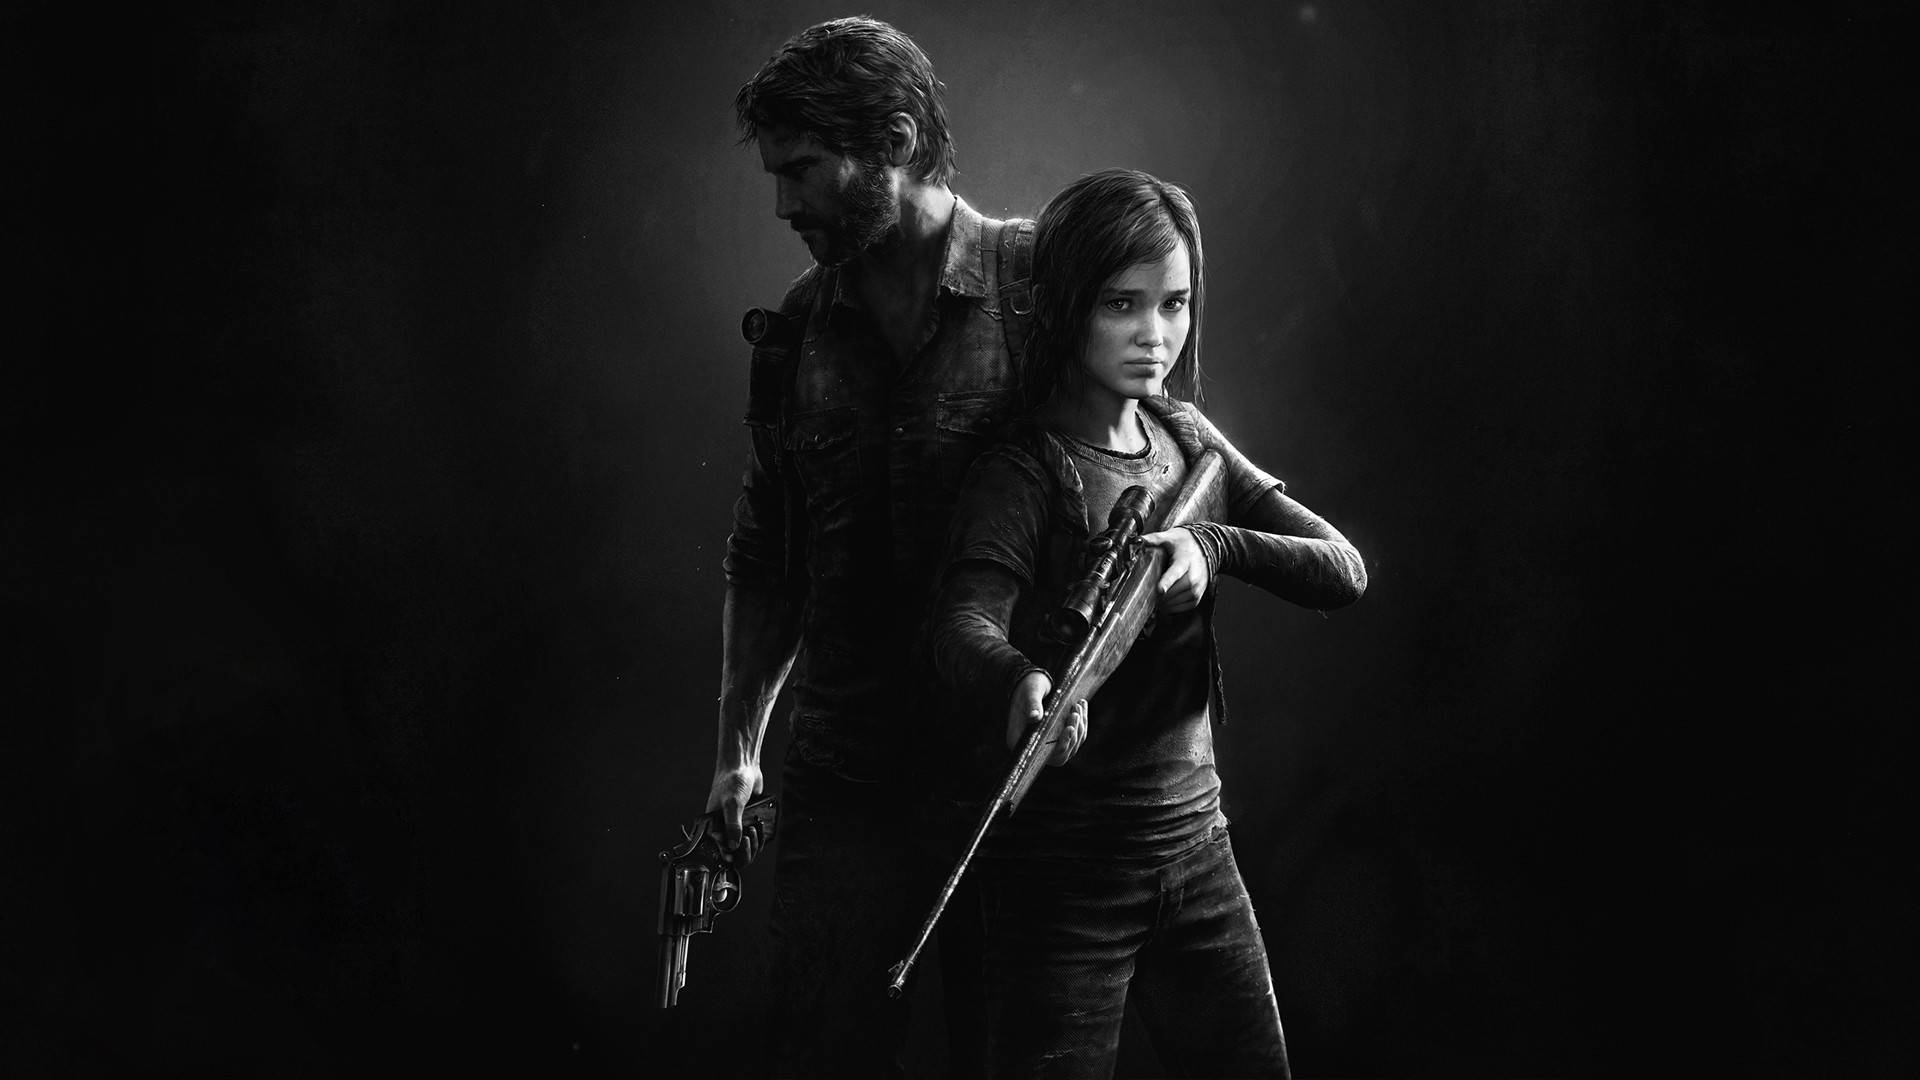 The last of us mobile Wallpaper  The last of us, The lest of us